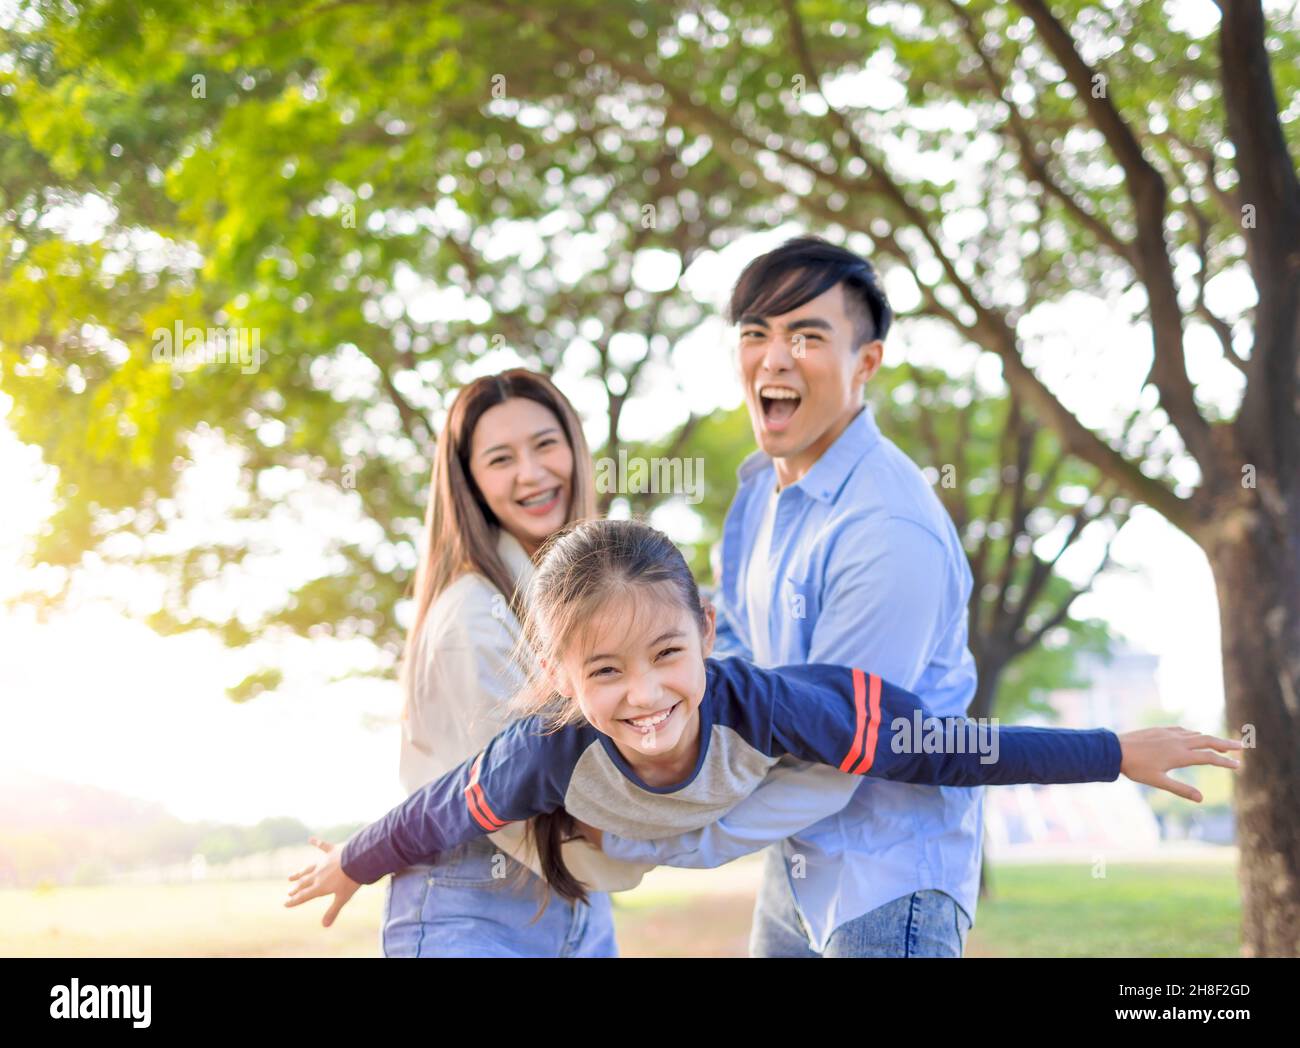 Happy Family with daughter playing together in the park Stock Photo